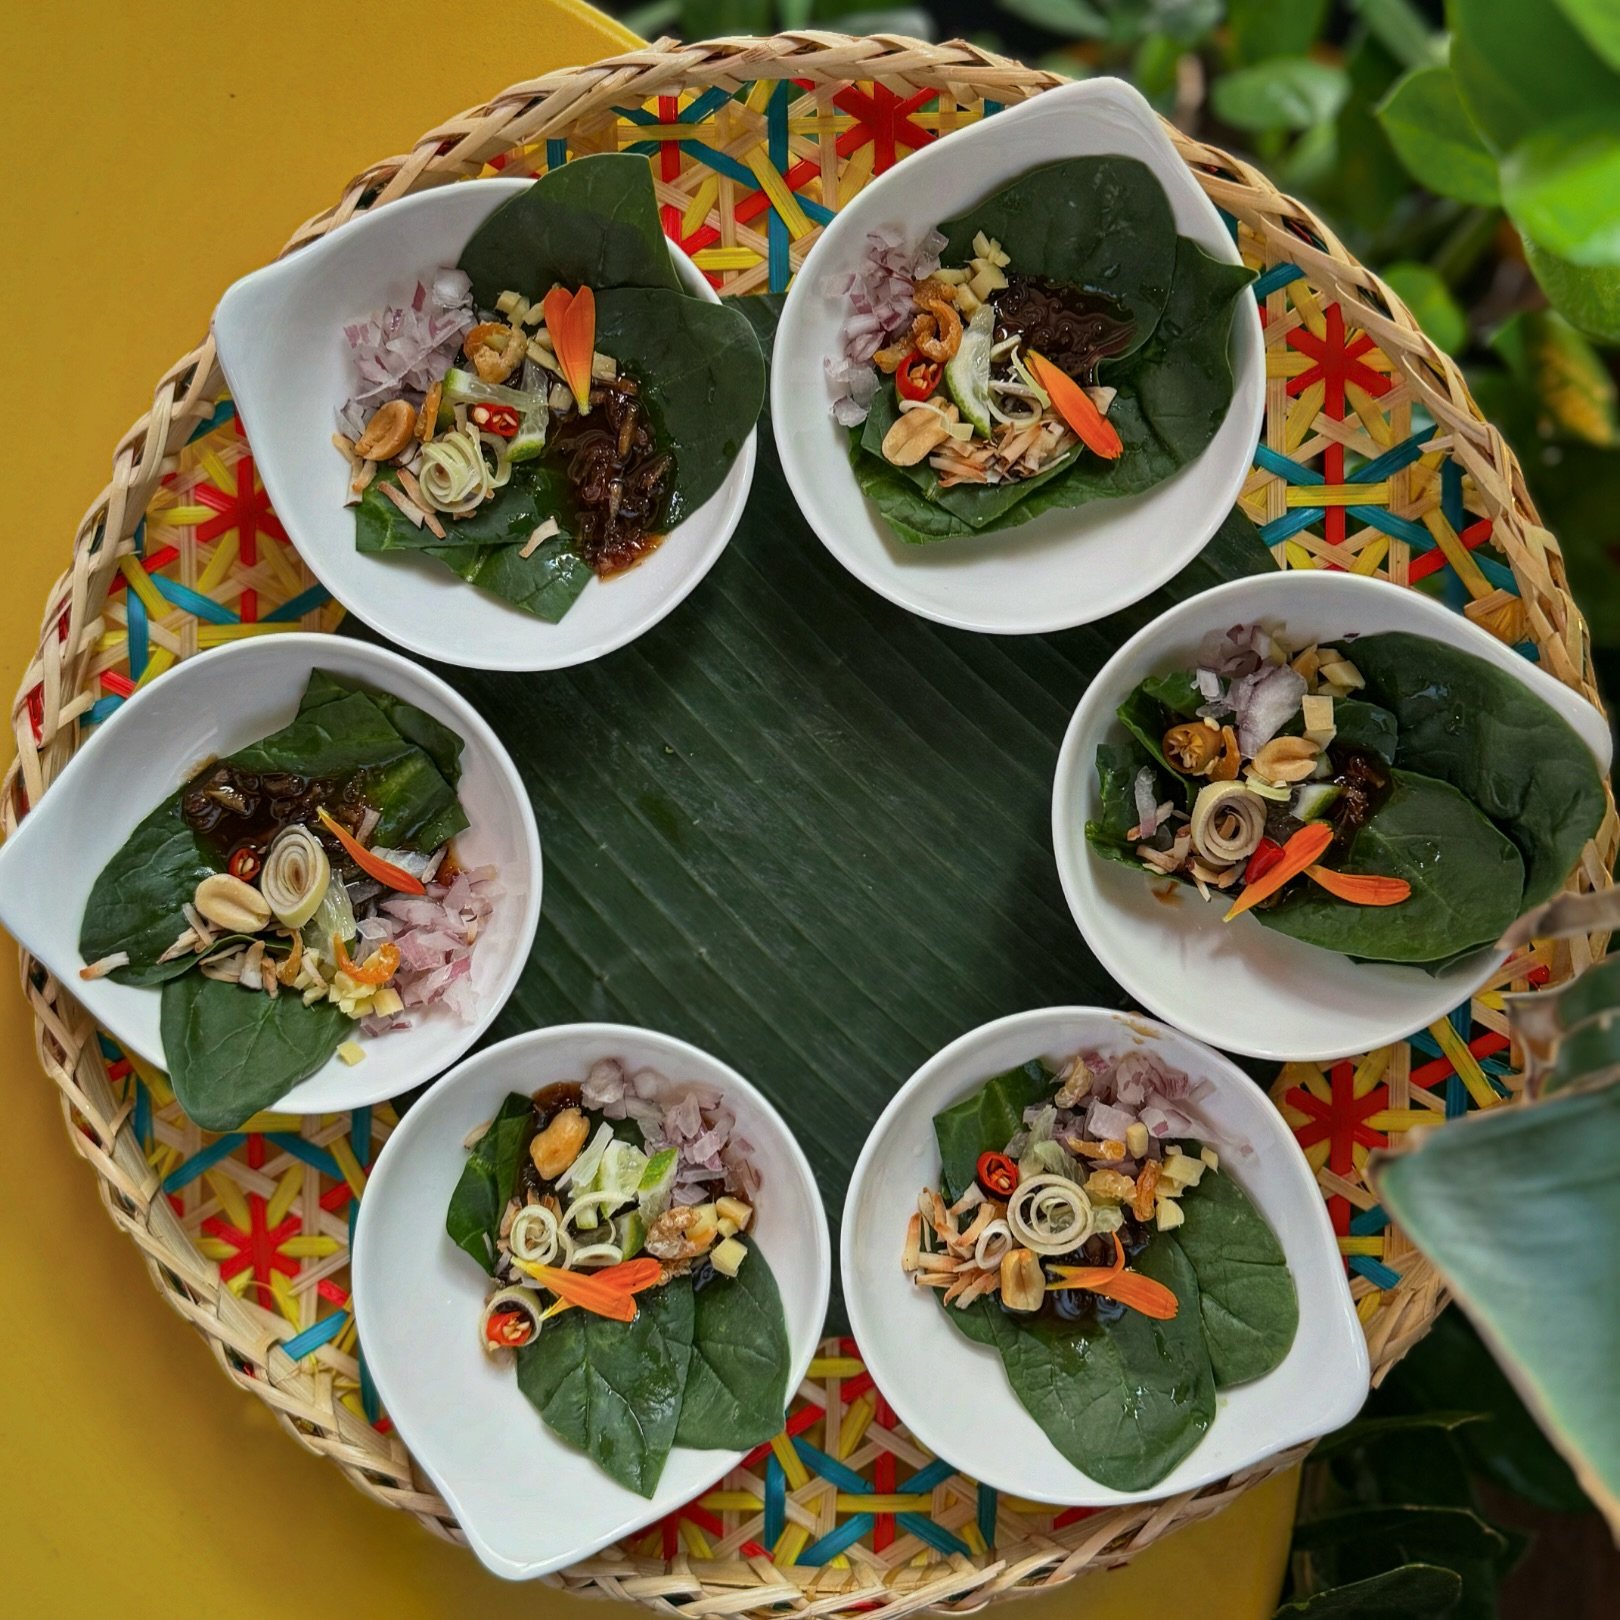 🌿🔥Miung Kum; #เมี่ยงคำ Green leaf-wrapped salad bites: a flavor featuring fiery ginger, Thai chilies, tangy lime, savory dried shrimps, crispy peanuts, toasted coconut, all dancing in a sweet and salty shrimp paste sauce! ✨

🔗 Order take out/ Make